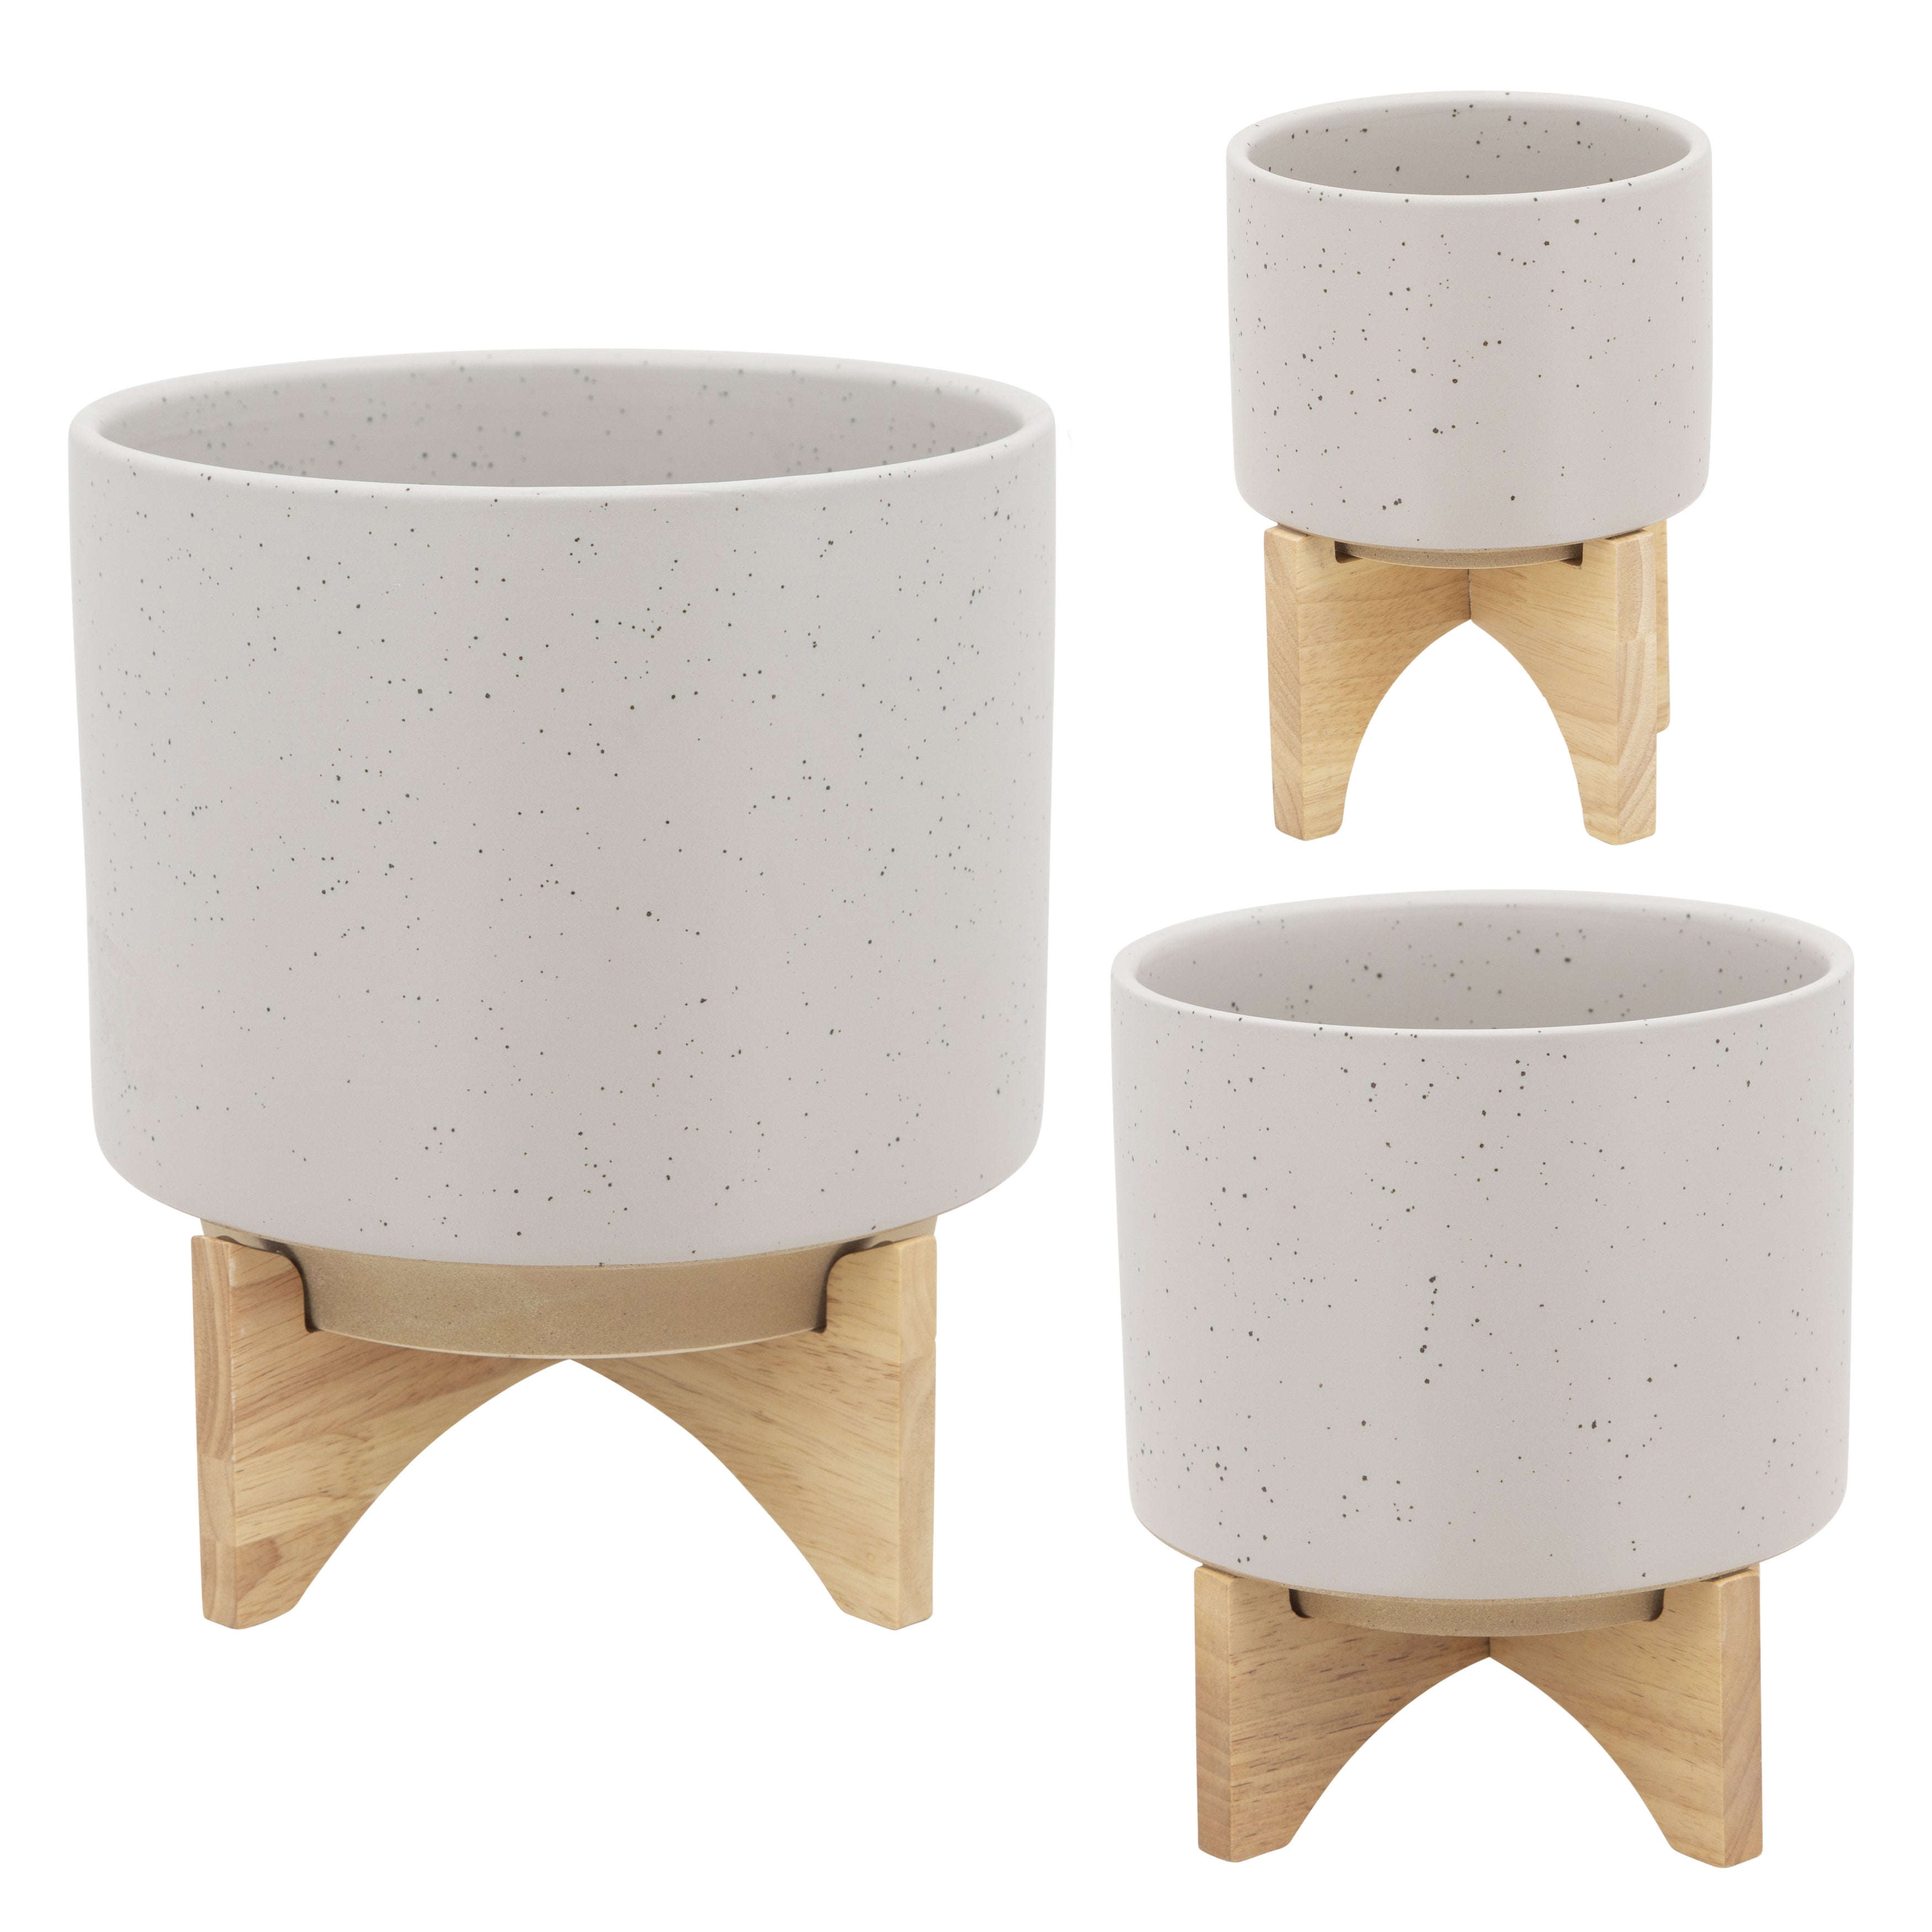 8" Planter with Wood Stand, Matte Beige, Planters